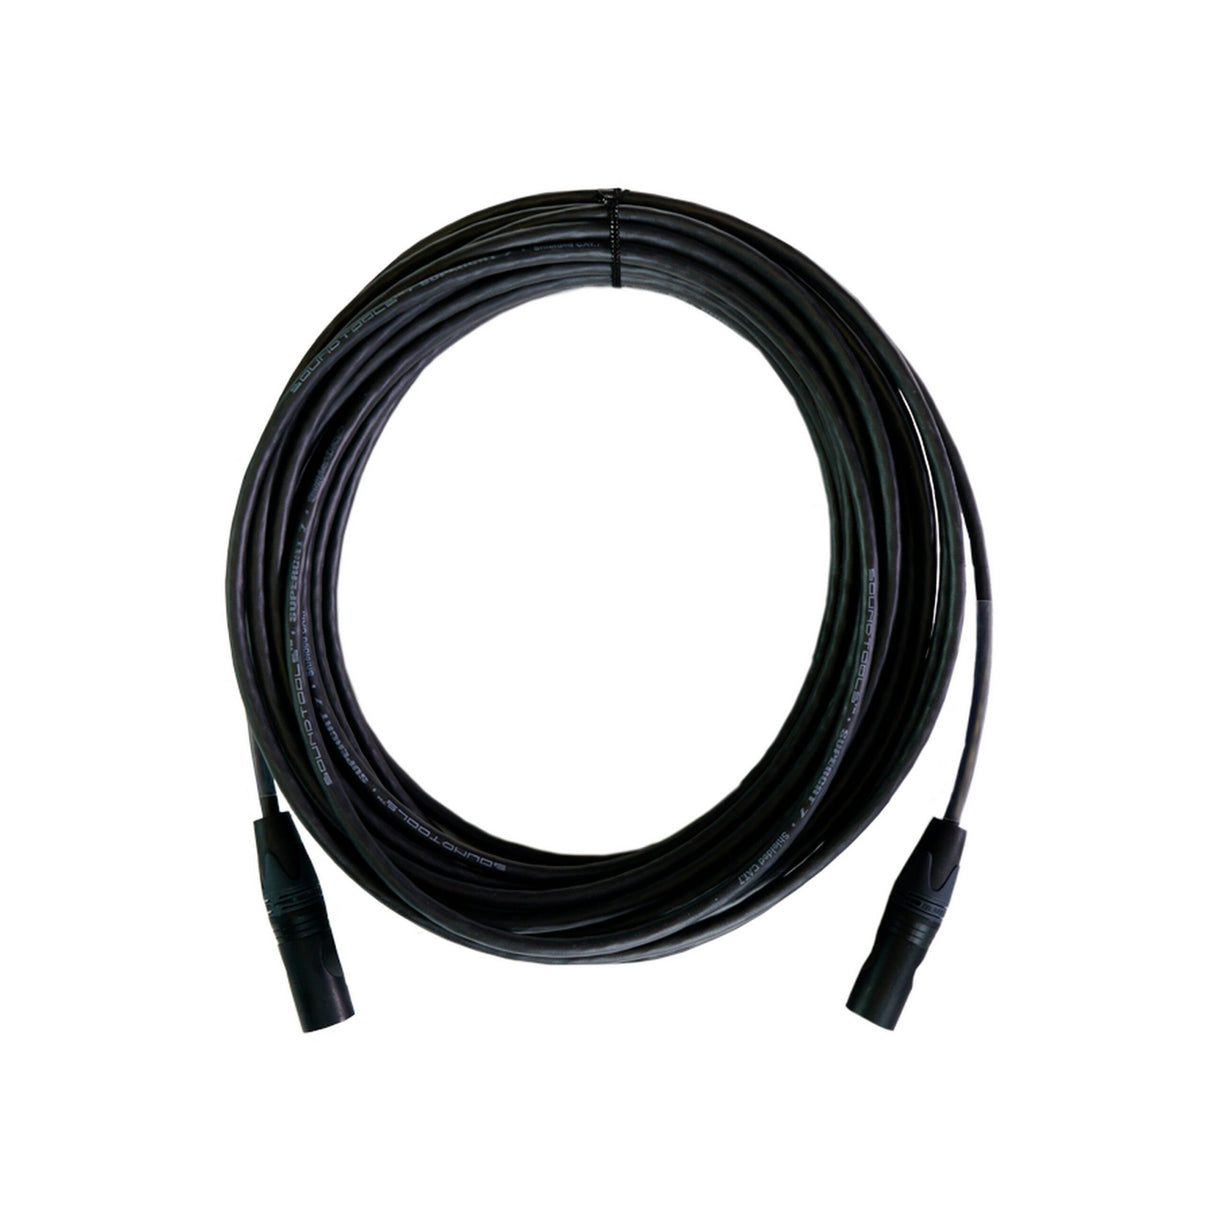 SoundTools SuperCAT 7 etherCON to etherCON CAT 7 Cable, 150-Foot Black